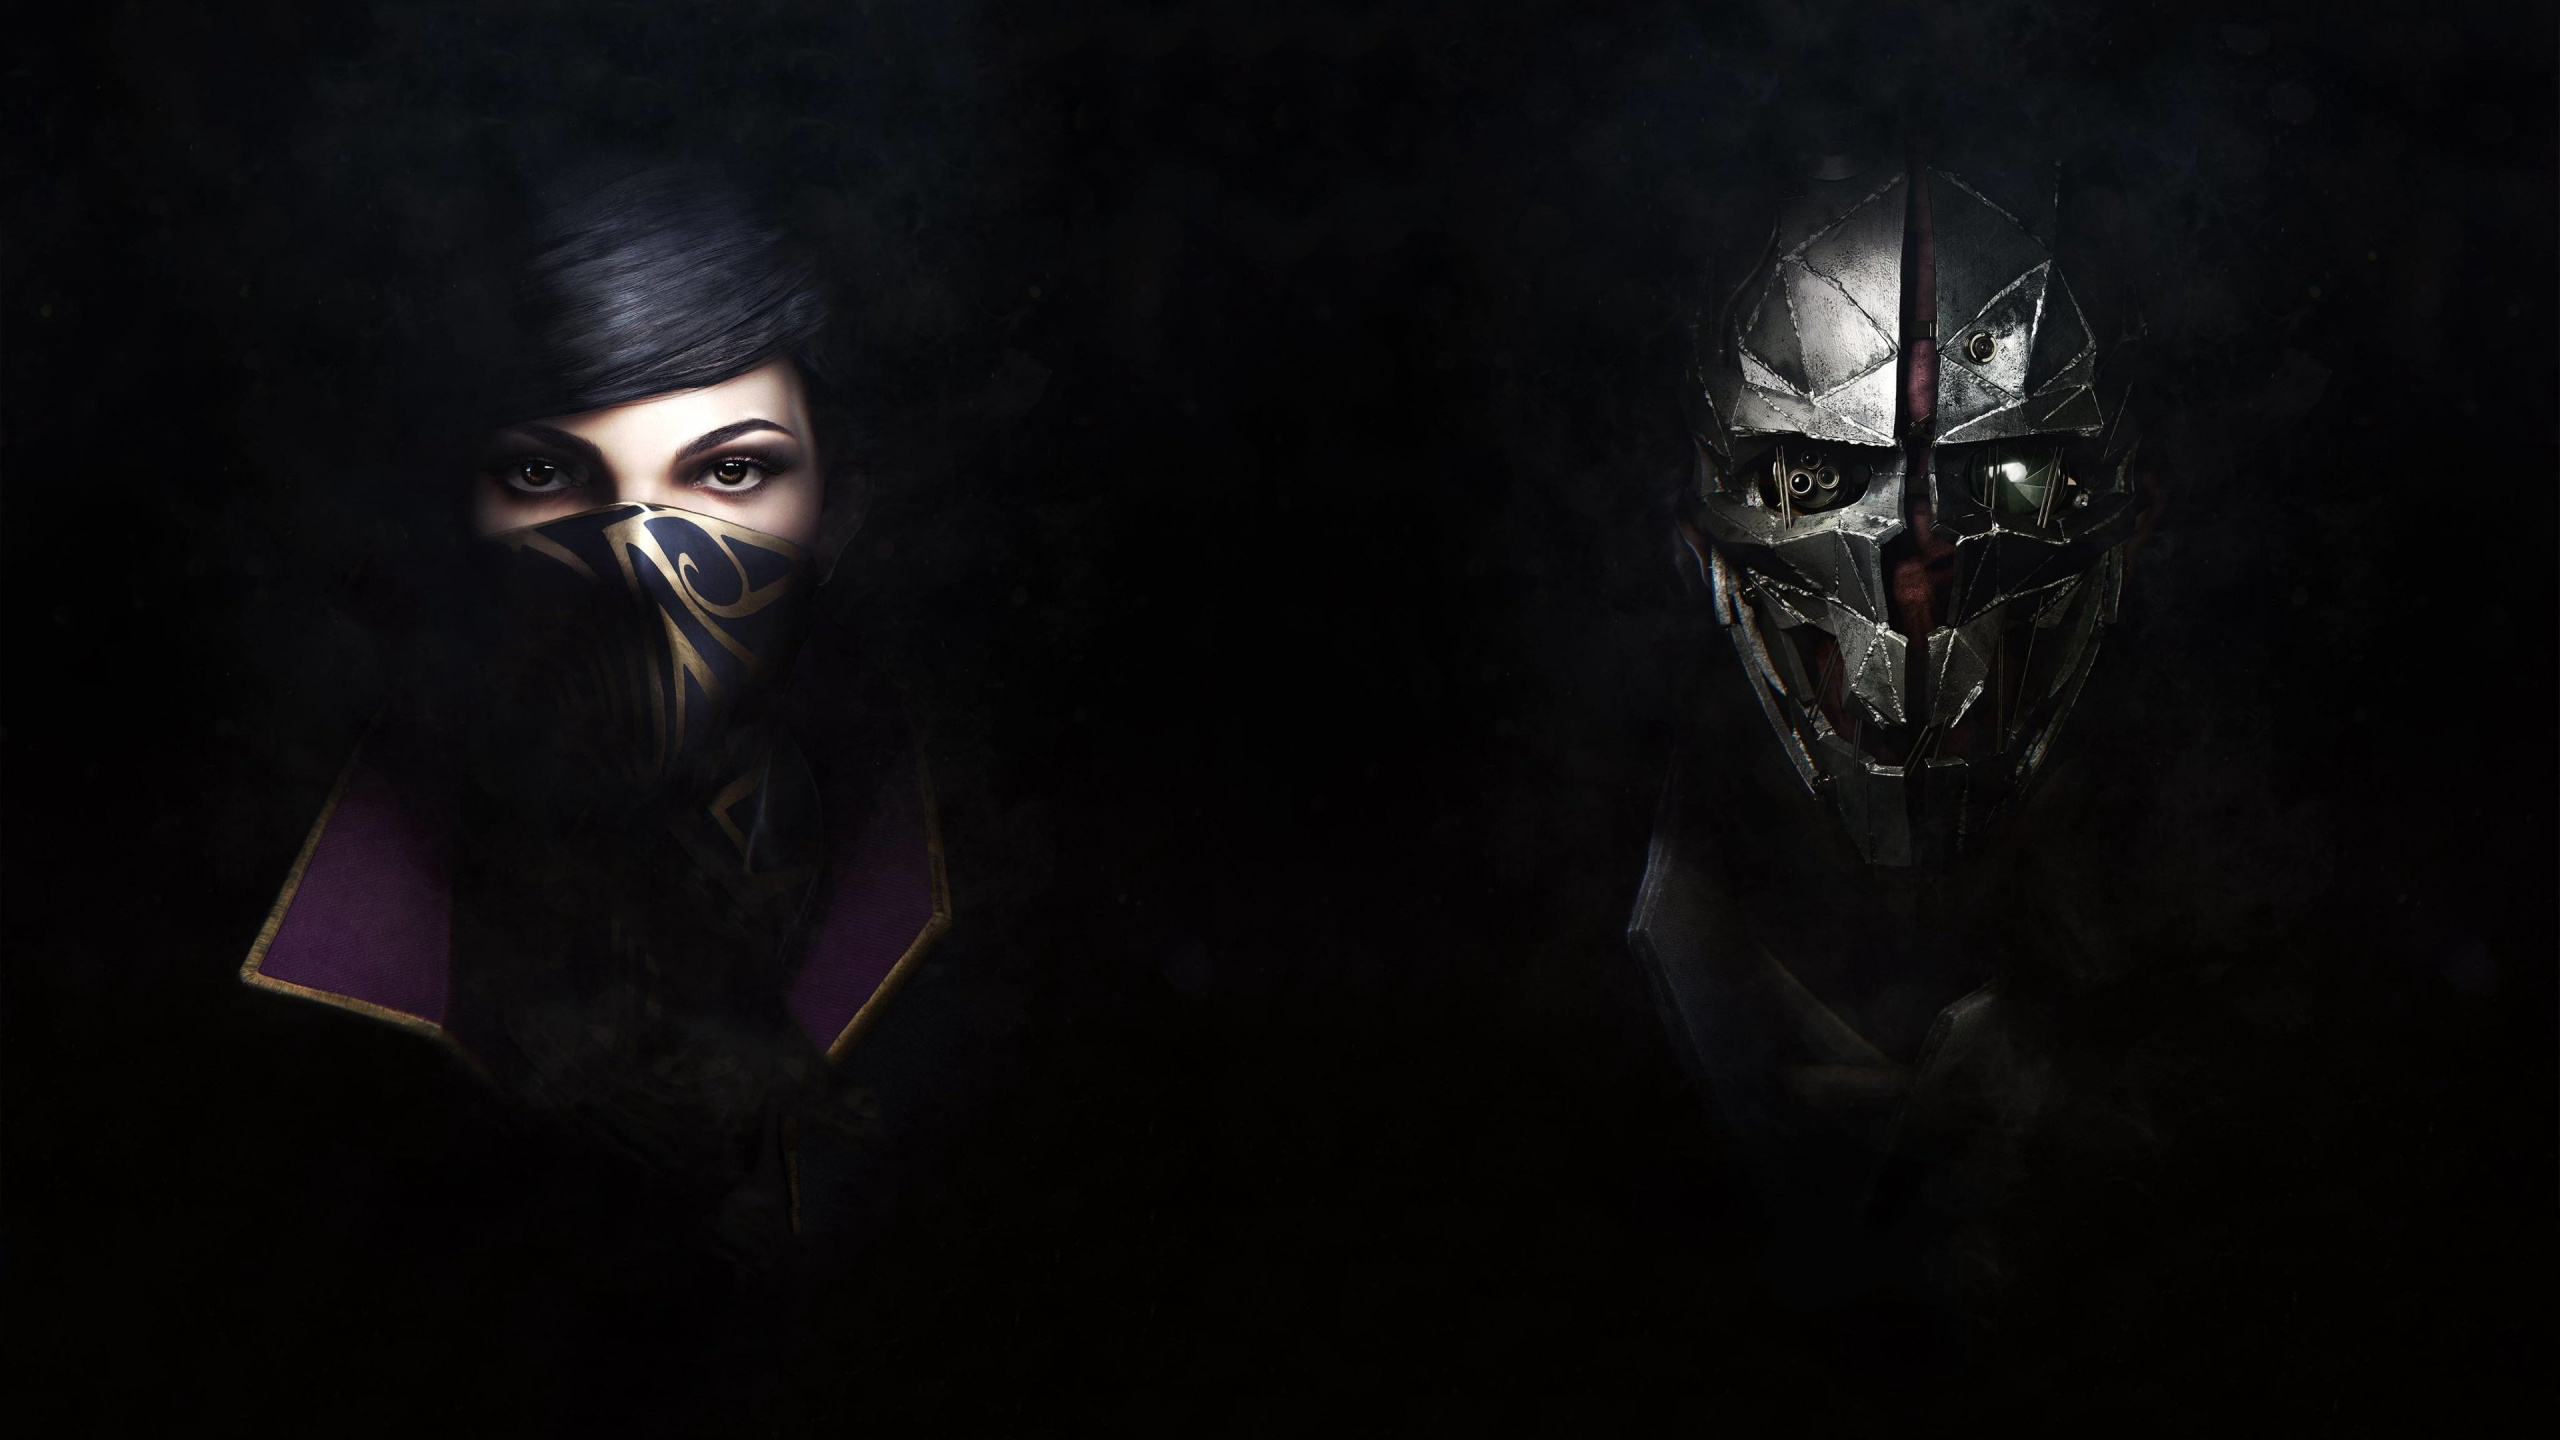 Dishonored 2, Dishonored, Bethesda Softworks, Stealth Game, Darkness. Wallpaper in 2560x1440 Resolution